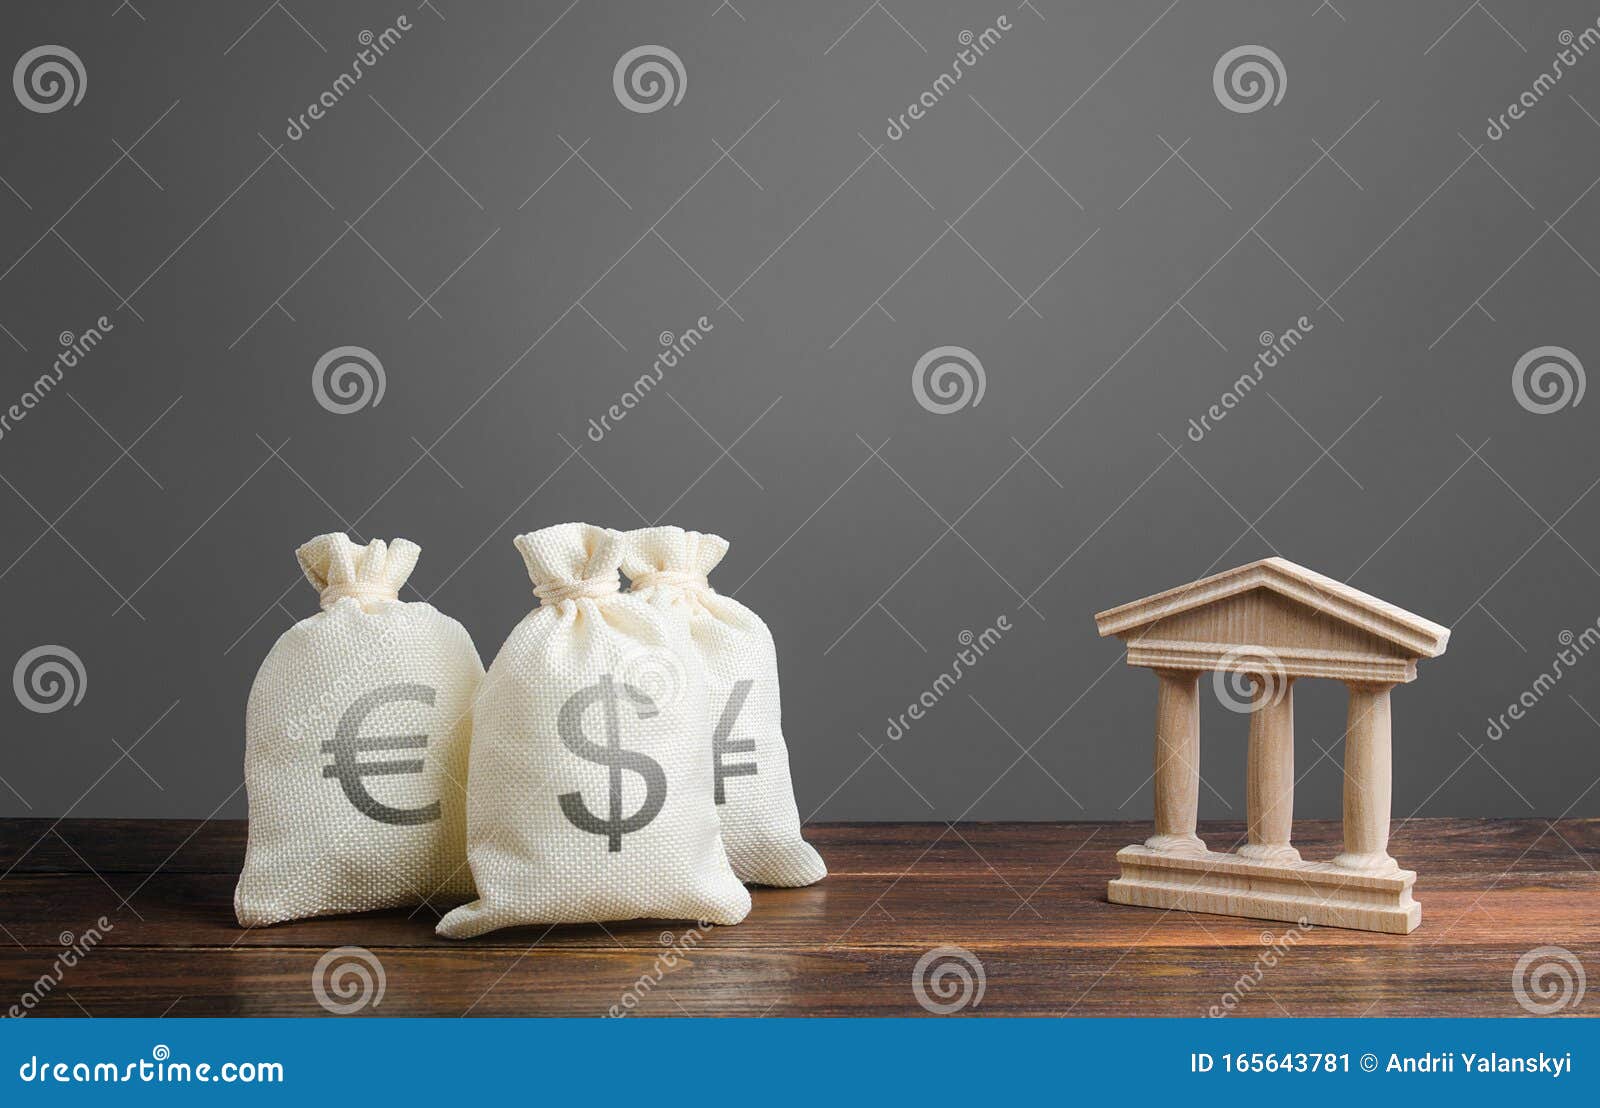 bags of money and a bank building. investments and deposits. lending to businesses and projects, financing and banking services